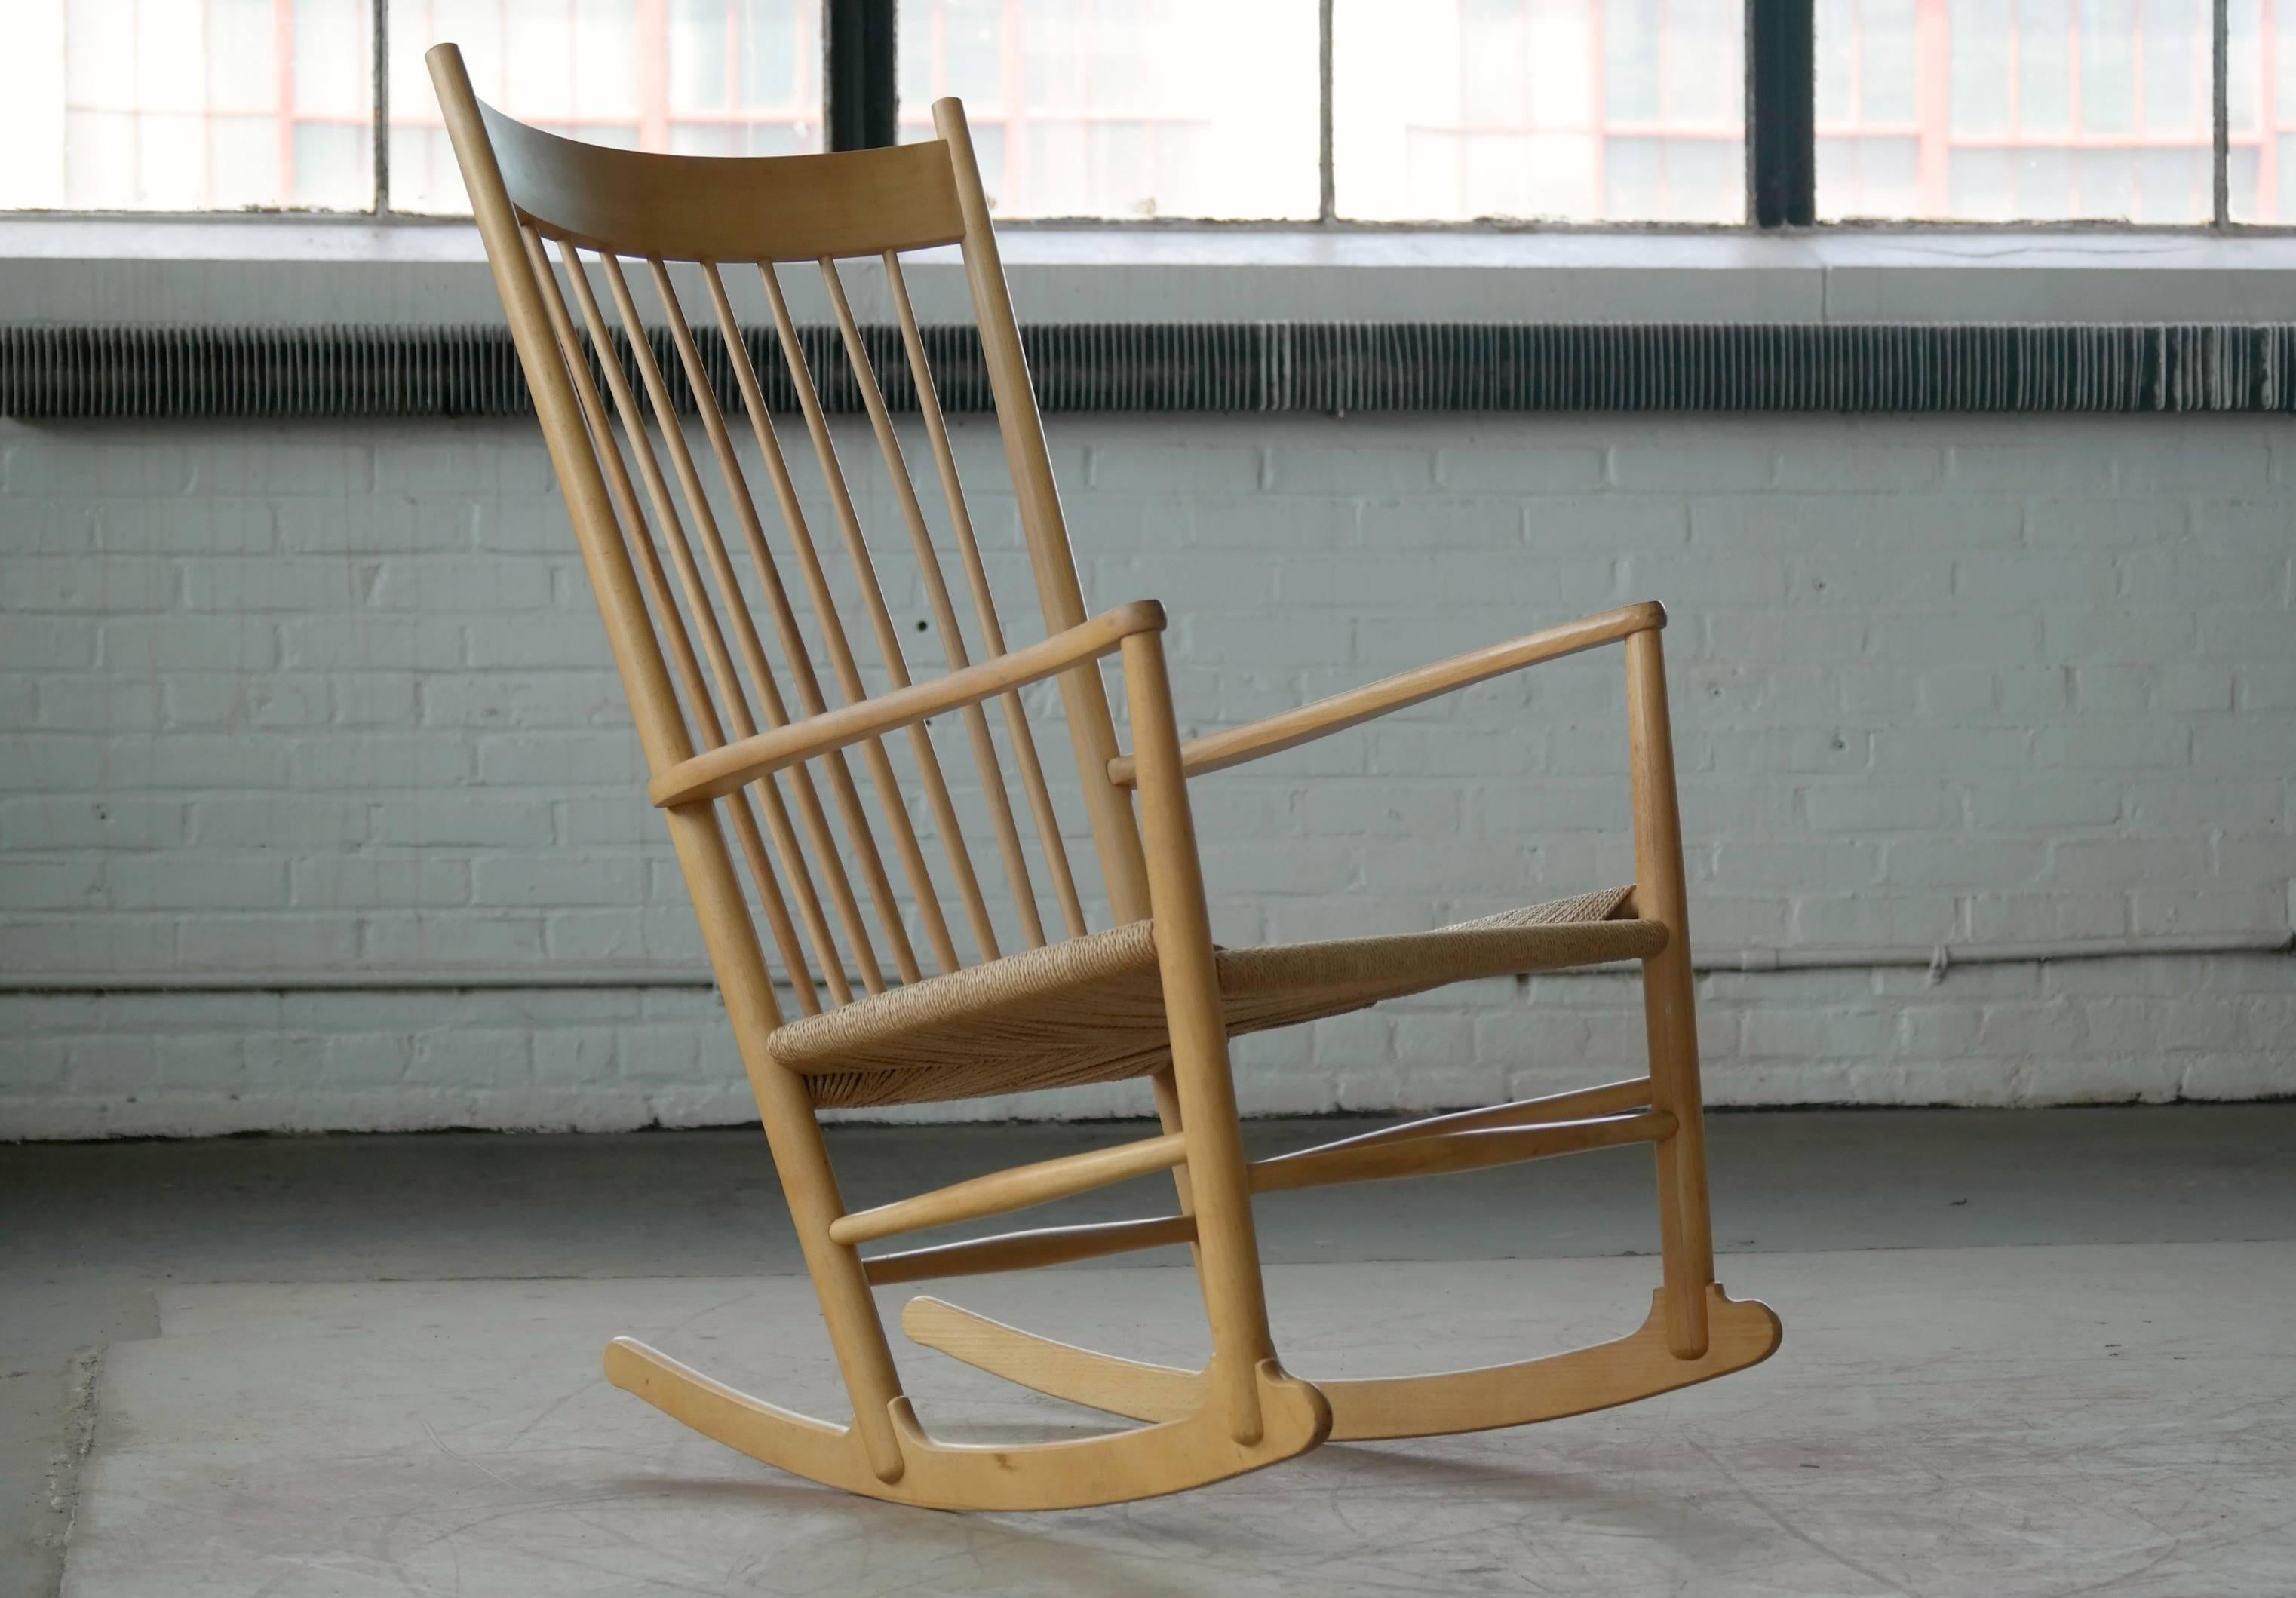 An early 1950s original Hans Wegner J16 rocking chair designed Shaker inspired rocking chair with a spindled back, curved armrests in beech and papercord seat all in its original finish. Made by FDB Mobler, Denmark.